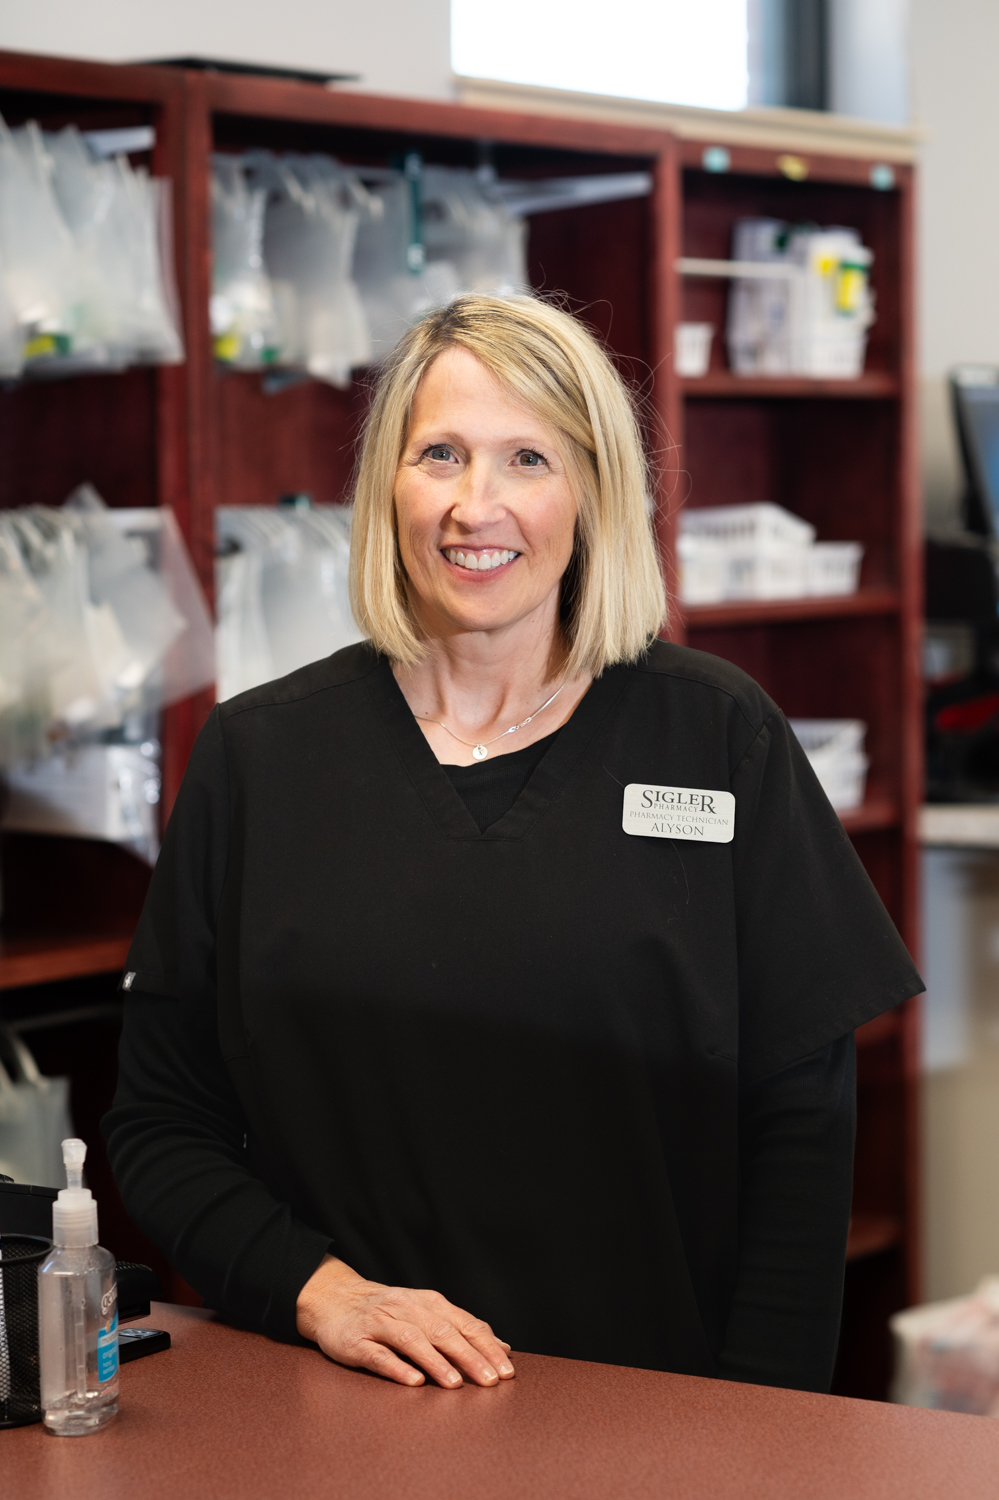 Pharmacy technicians are vital to the workflow of independent pharmacies